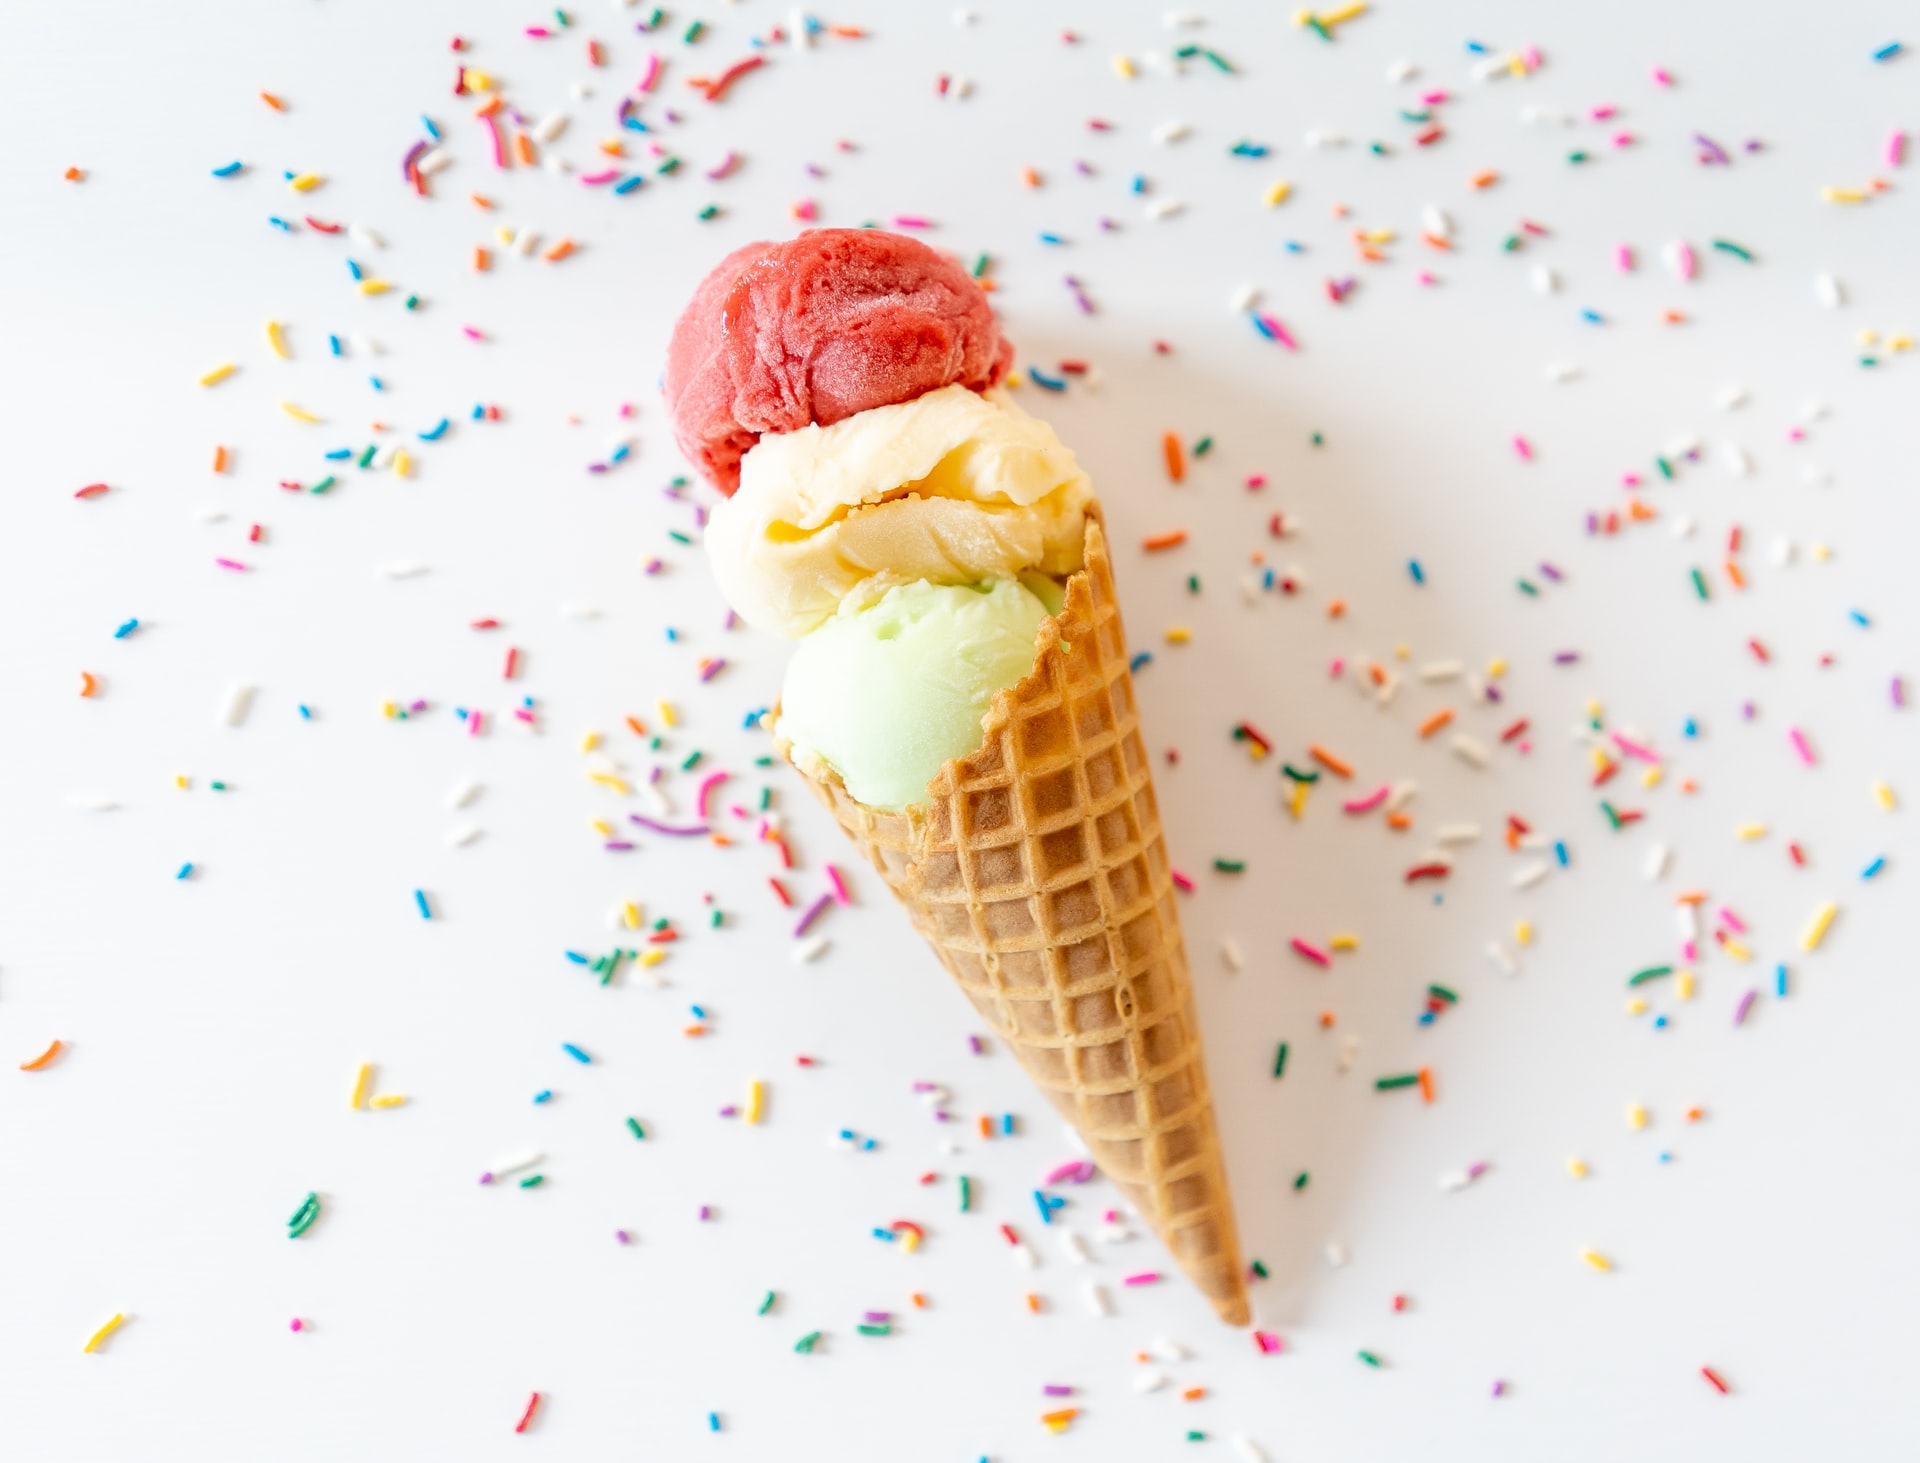 Everything you need to know about making ice cream